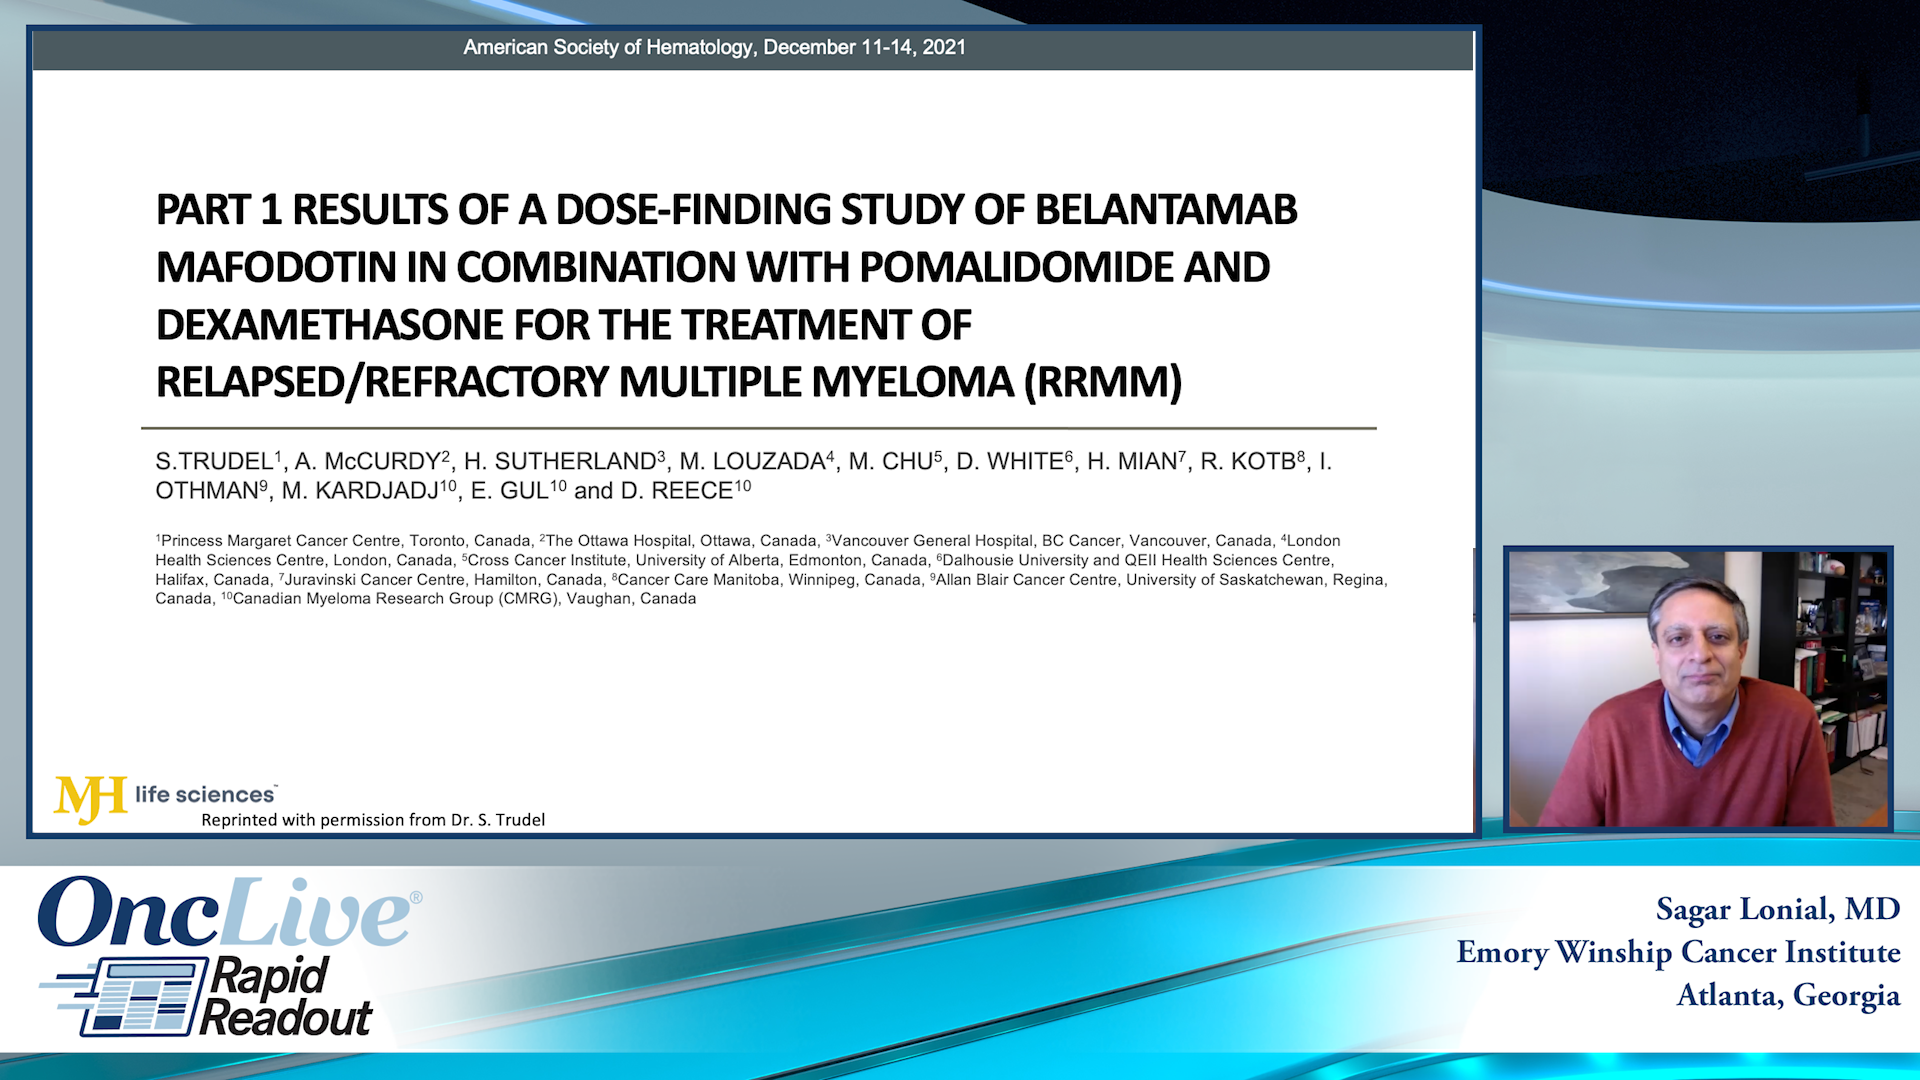 Part 1 Results of Belantamab Mafodotin in Combination with Pomalidomide and Dexamethasone for RRMM